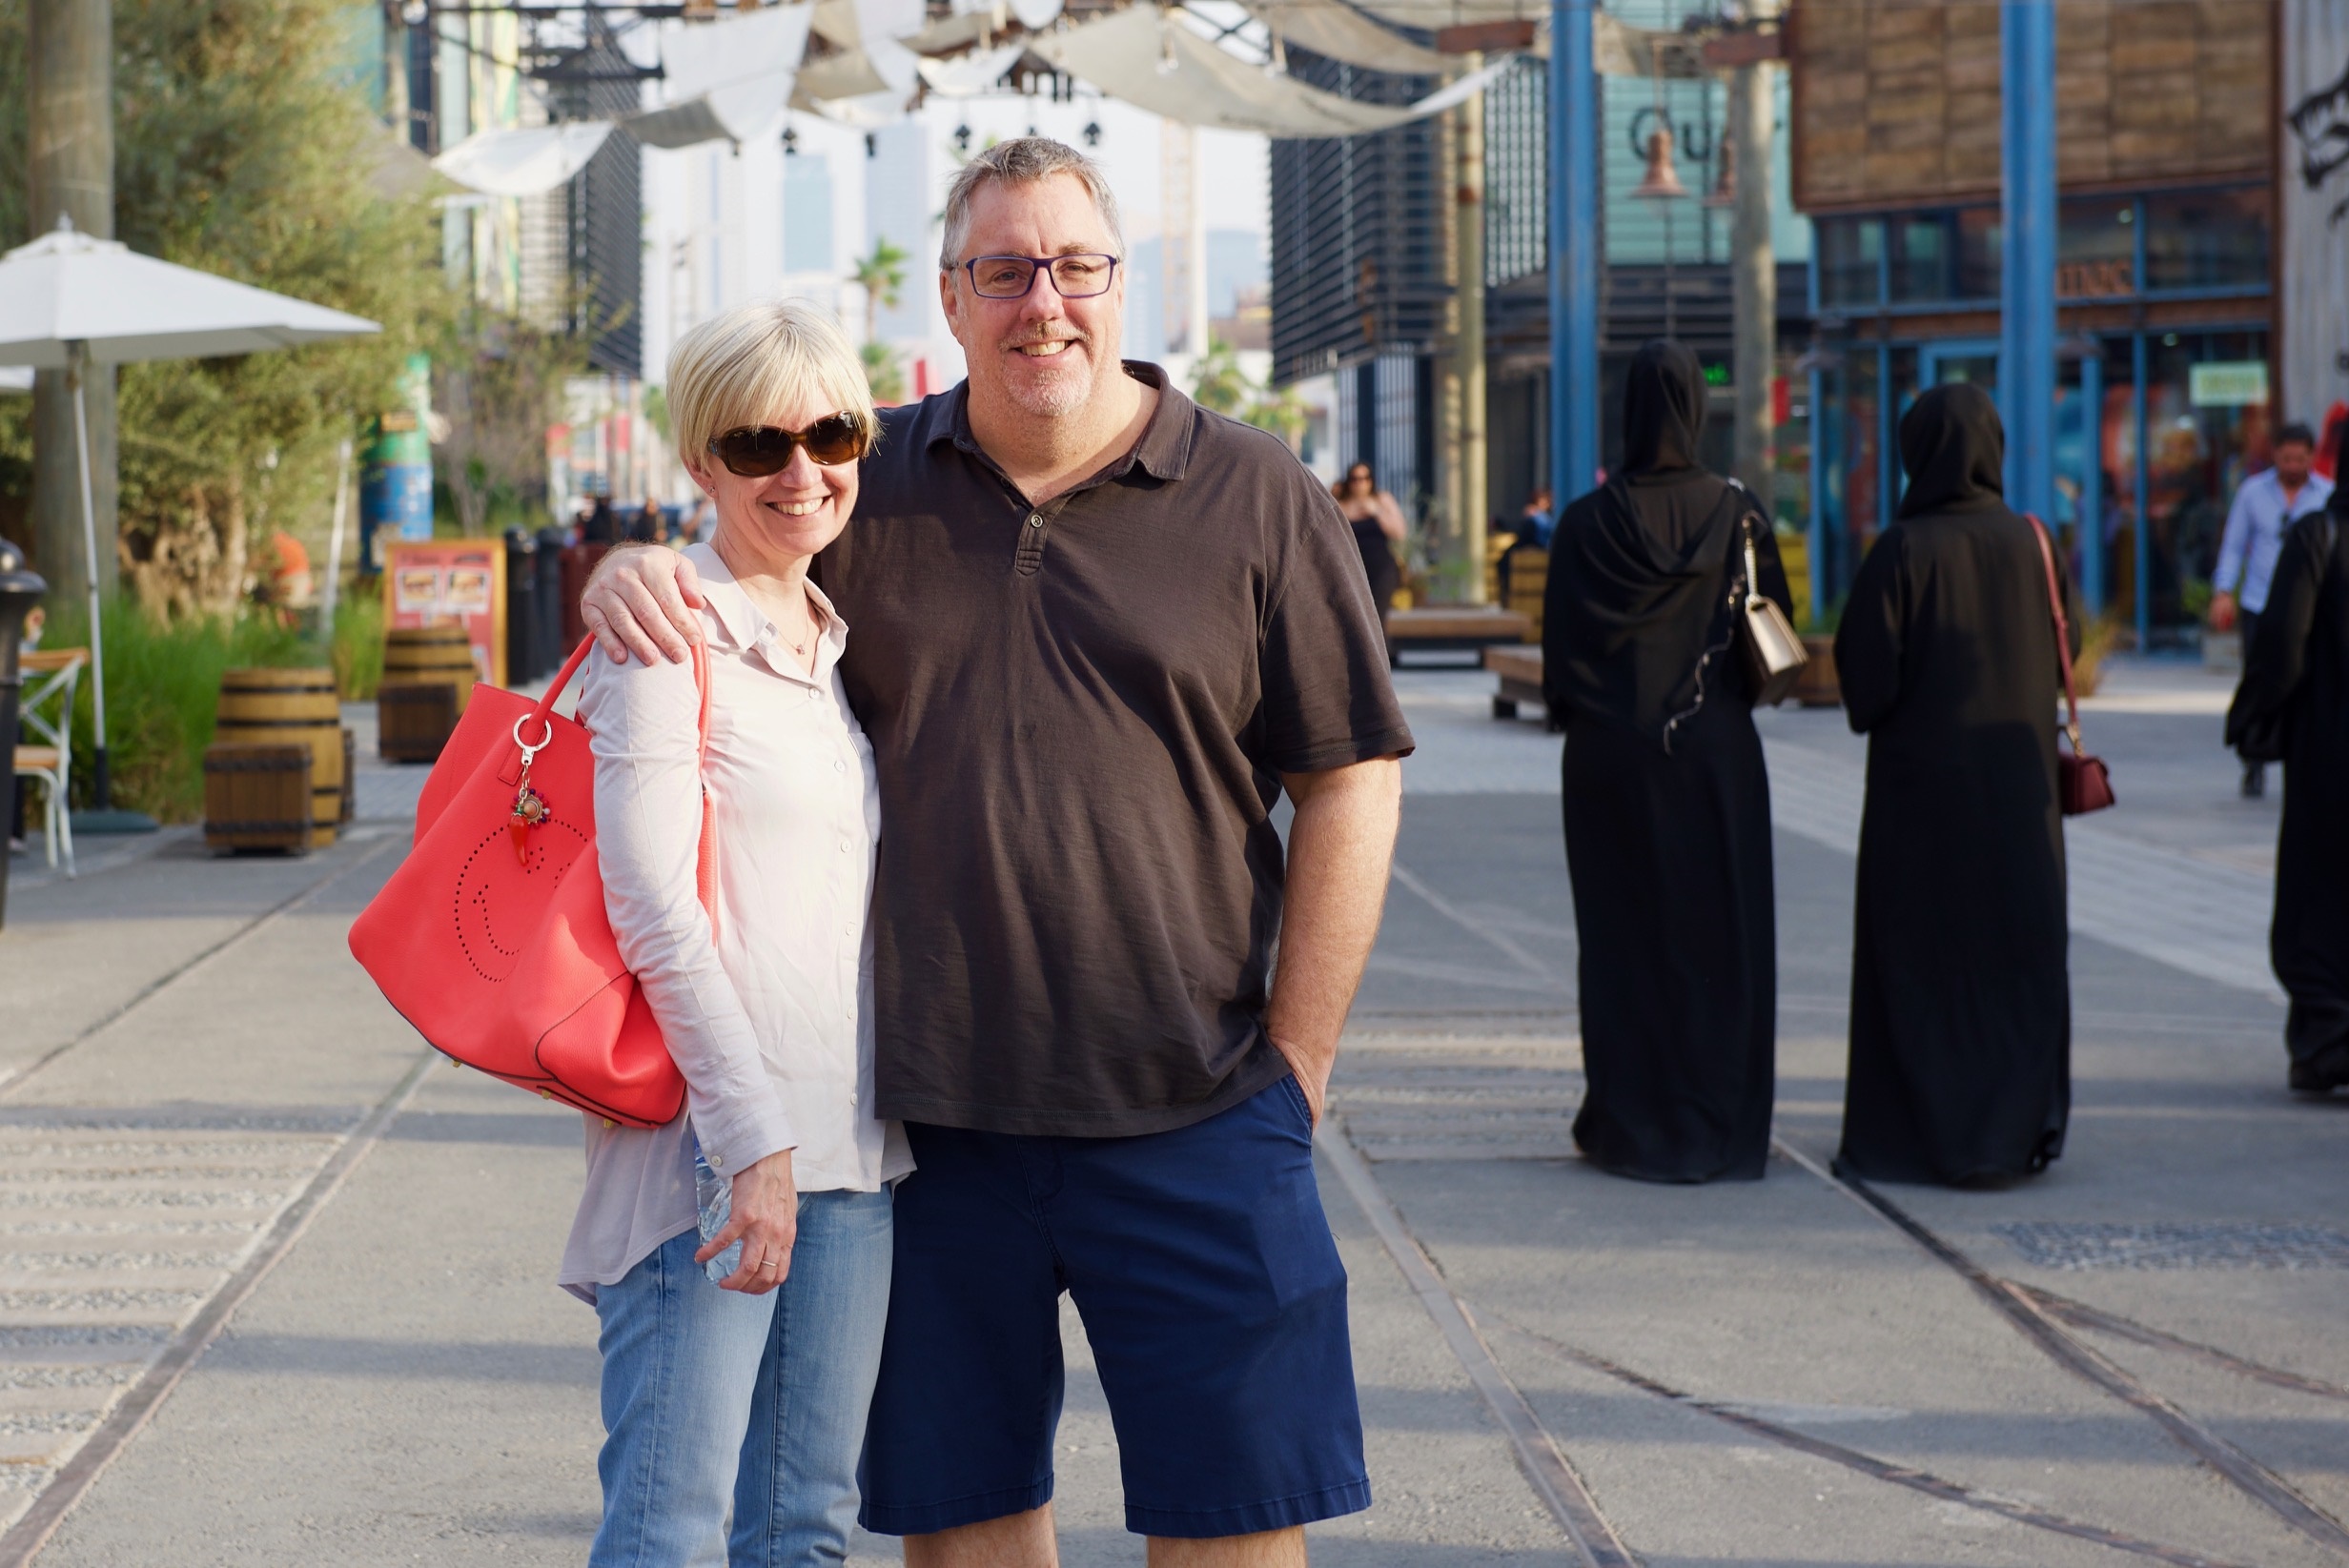 Alistair and Karyn  from United Arab Emirates